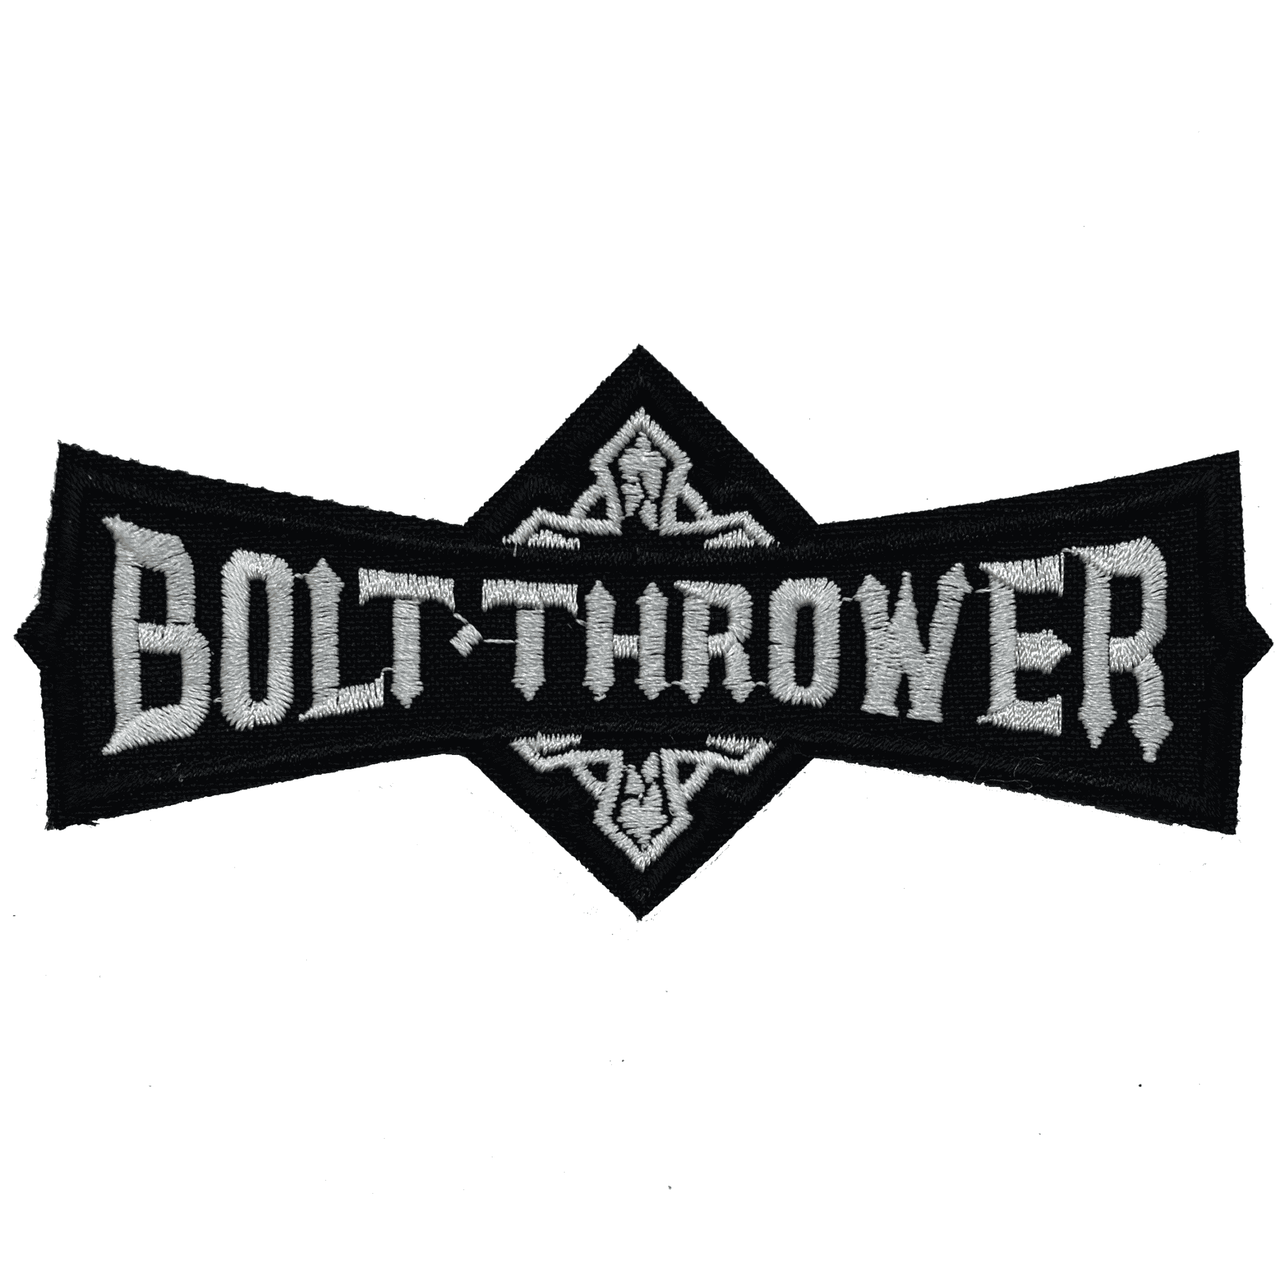 Bolt Thrower Embroidered Patch